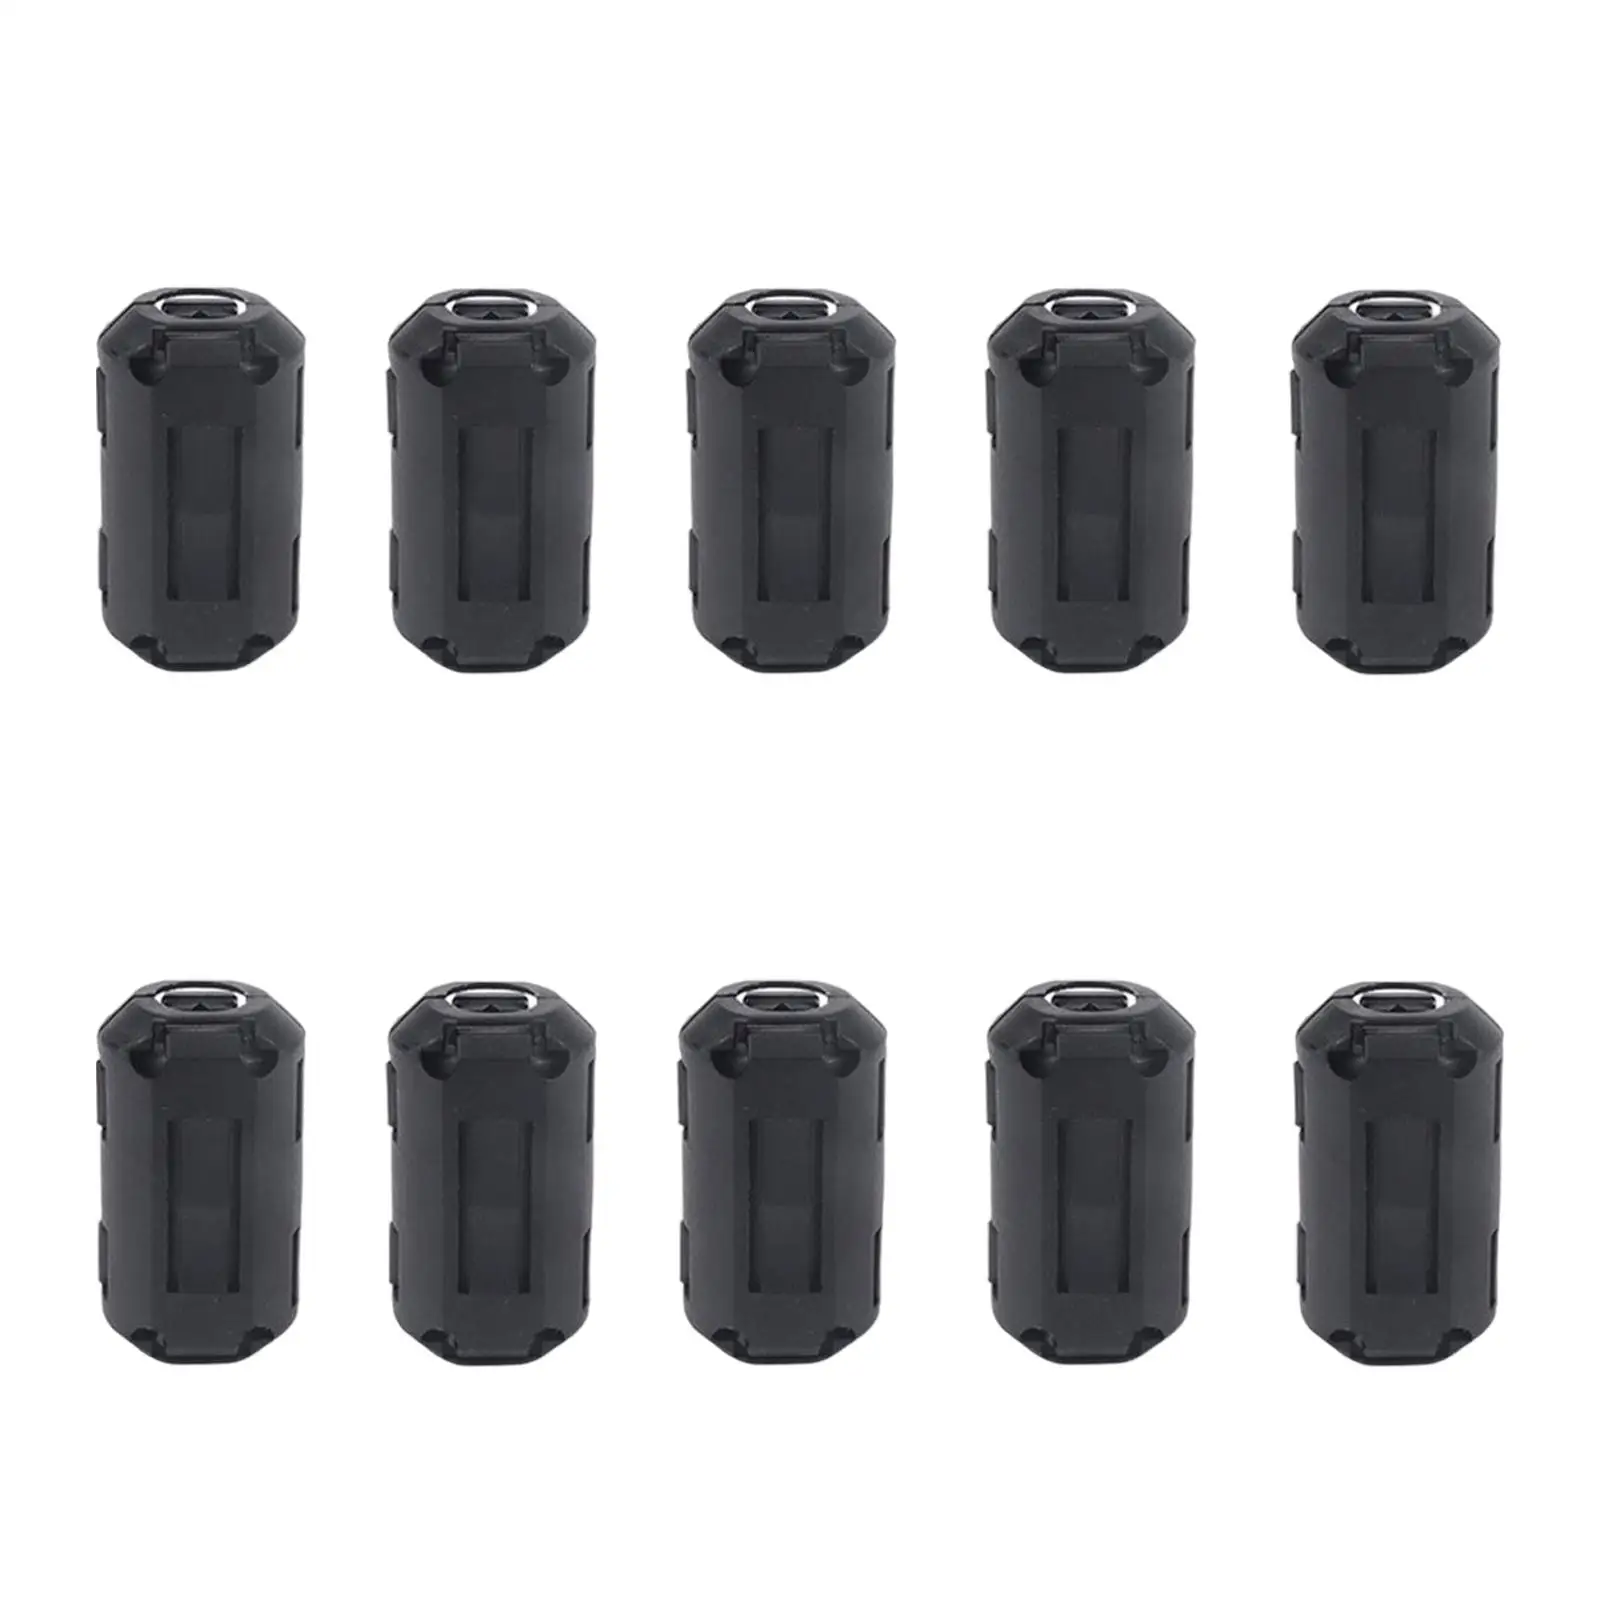 10x 13mm Ferrite Core Rings Beads Rfi Noise Suppressor Filters for Antenna 9-13mm Cable Audio Cable Clips Noise Filter Clips